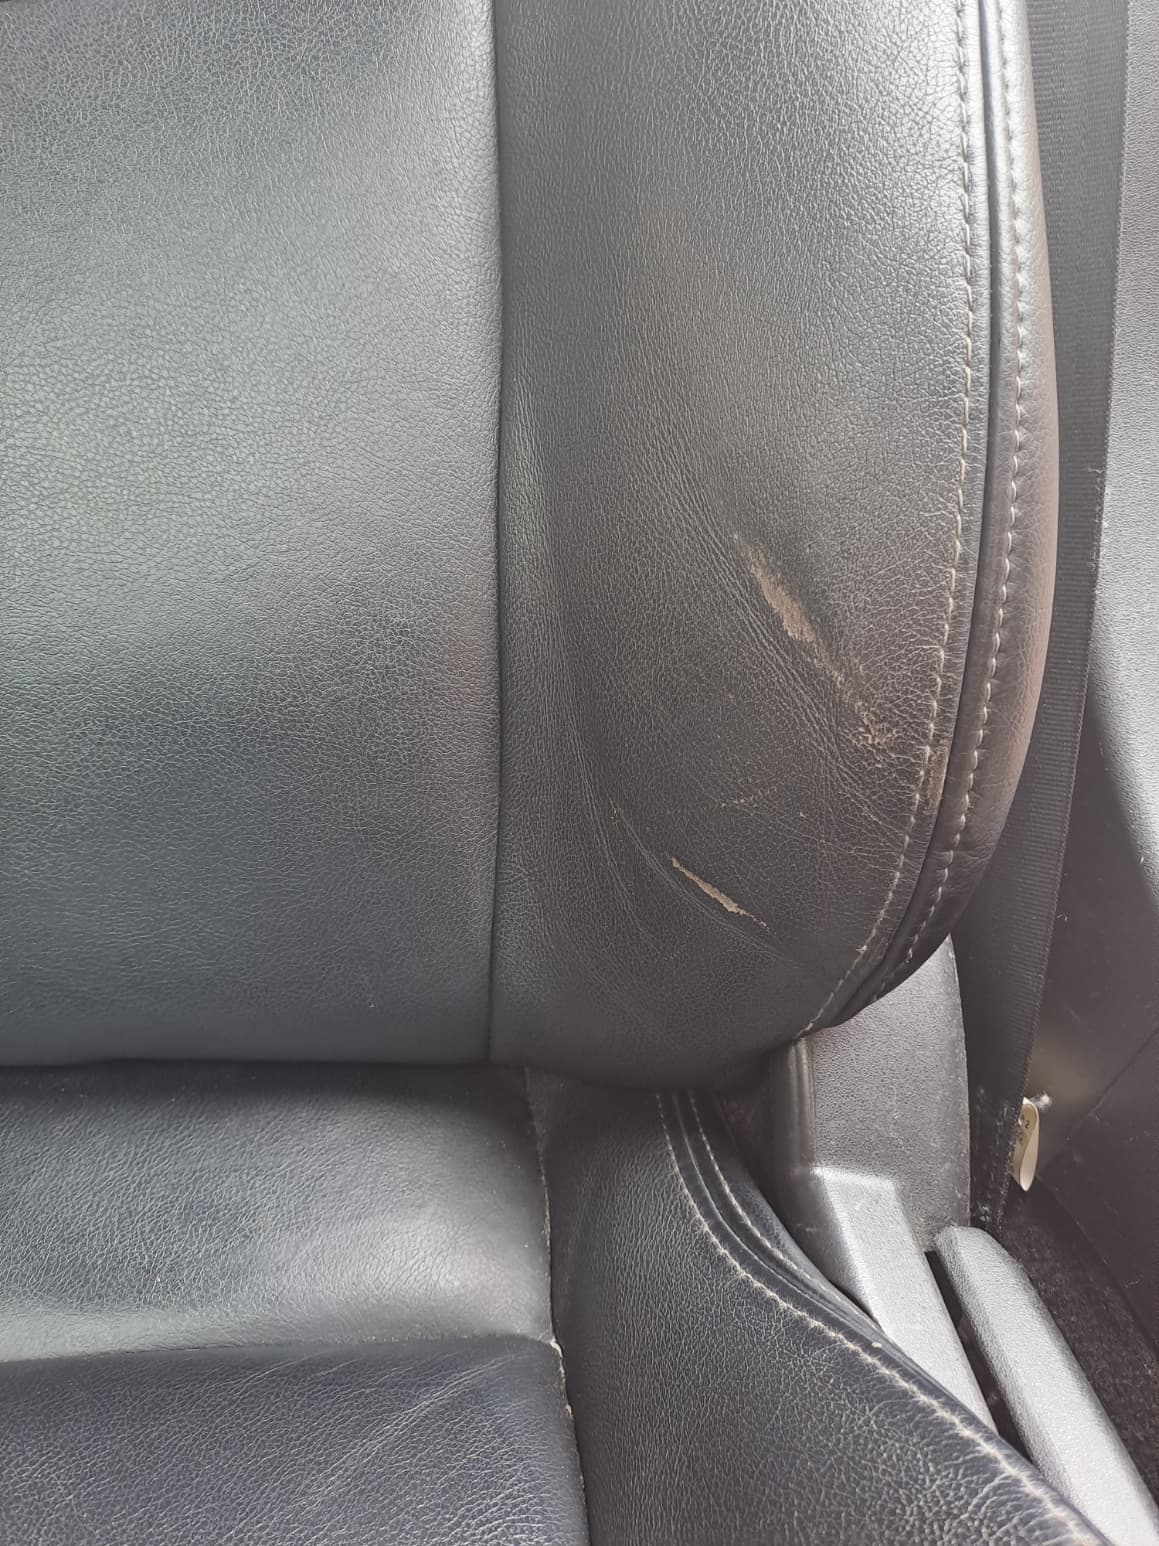 How I Revived My Worn Leather Recliner with Furniture Clinic Leather  Recoloring Balm 